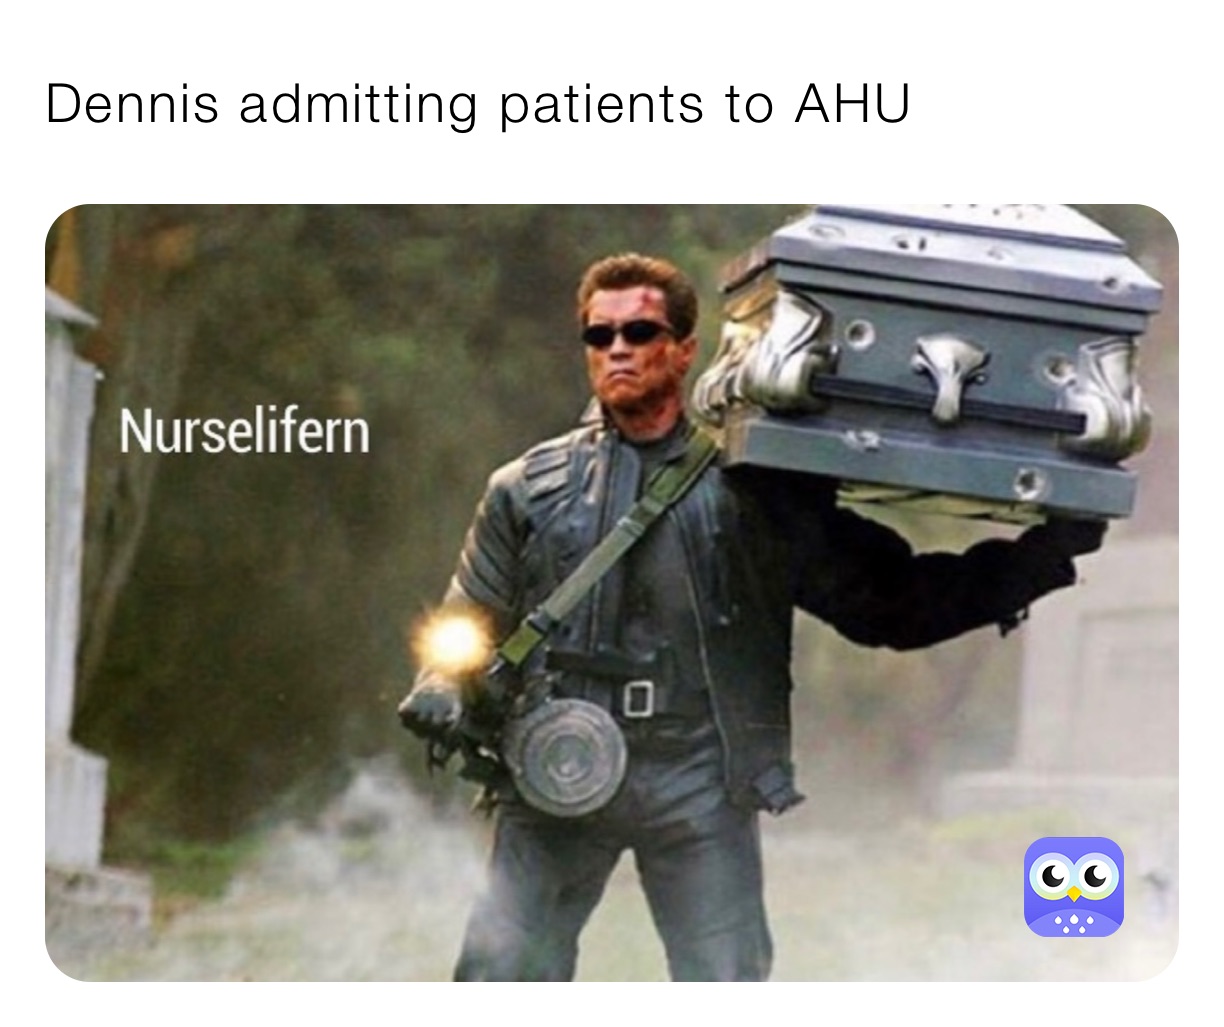 Dennis admitting patients to AHU